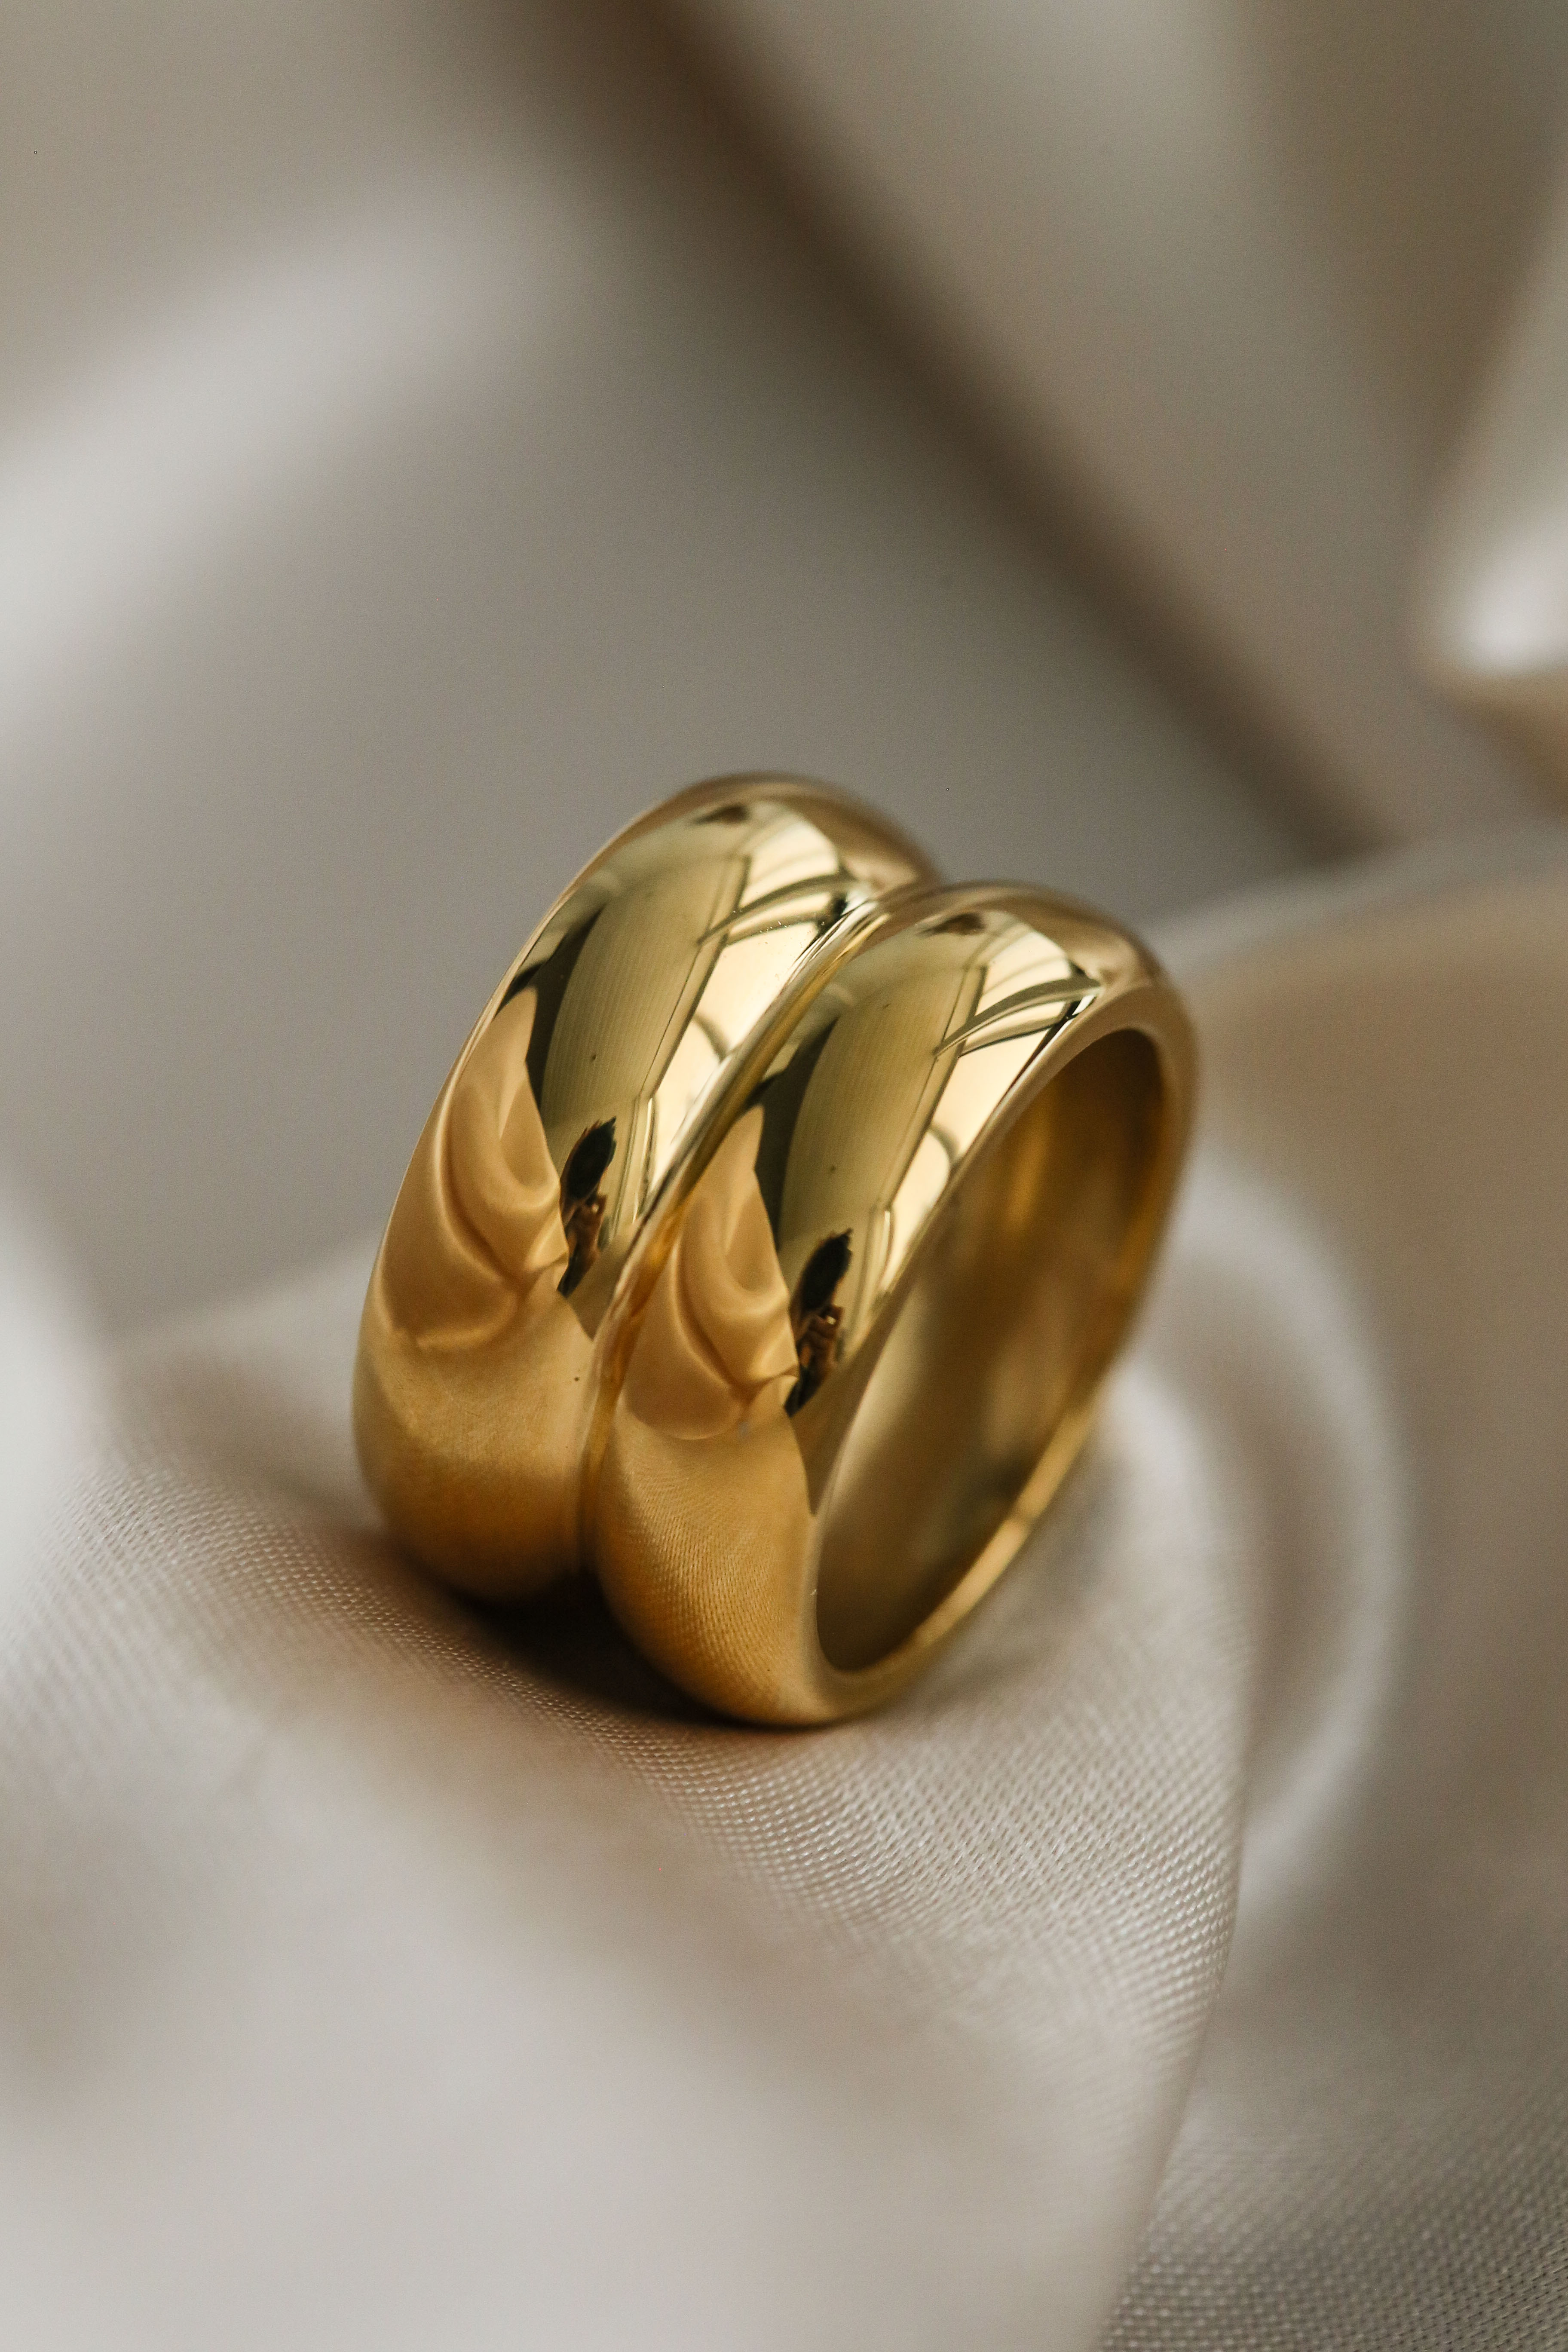 Bowie Ring - Boutique Minimaliste has waterproof, durable, elegant and vintage inspired jewelry